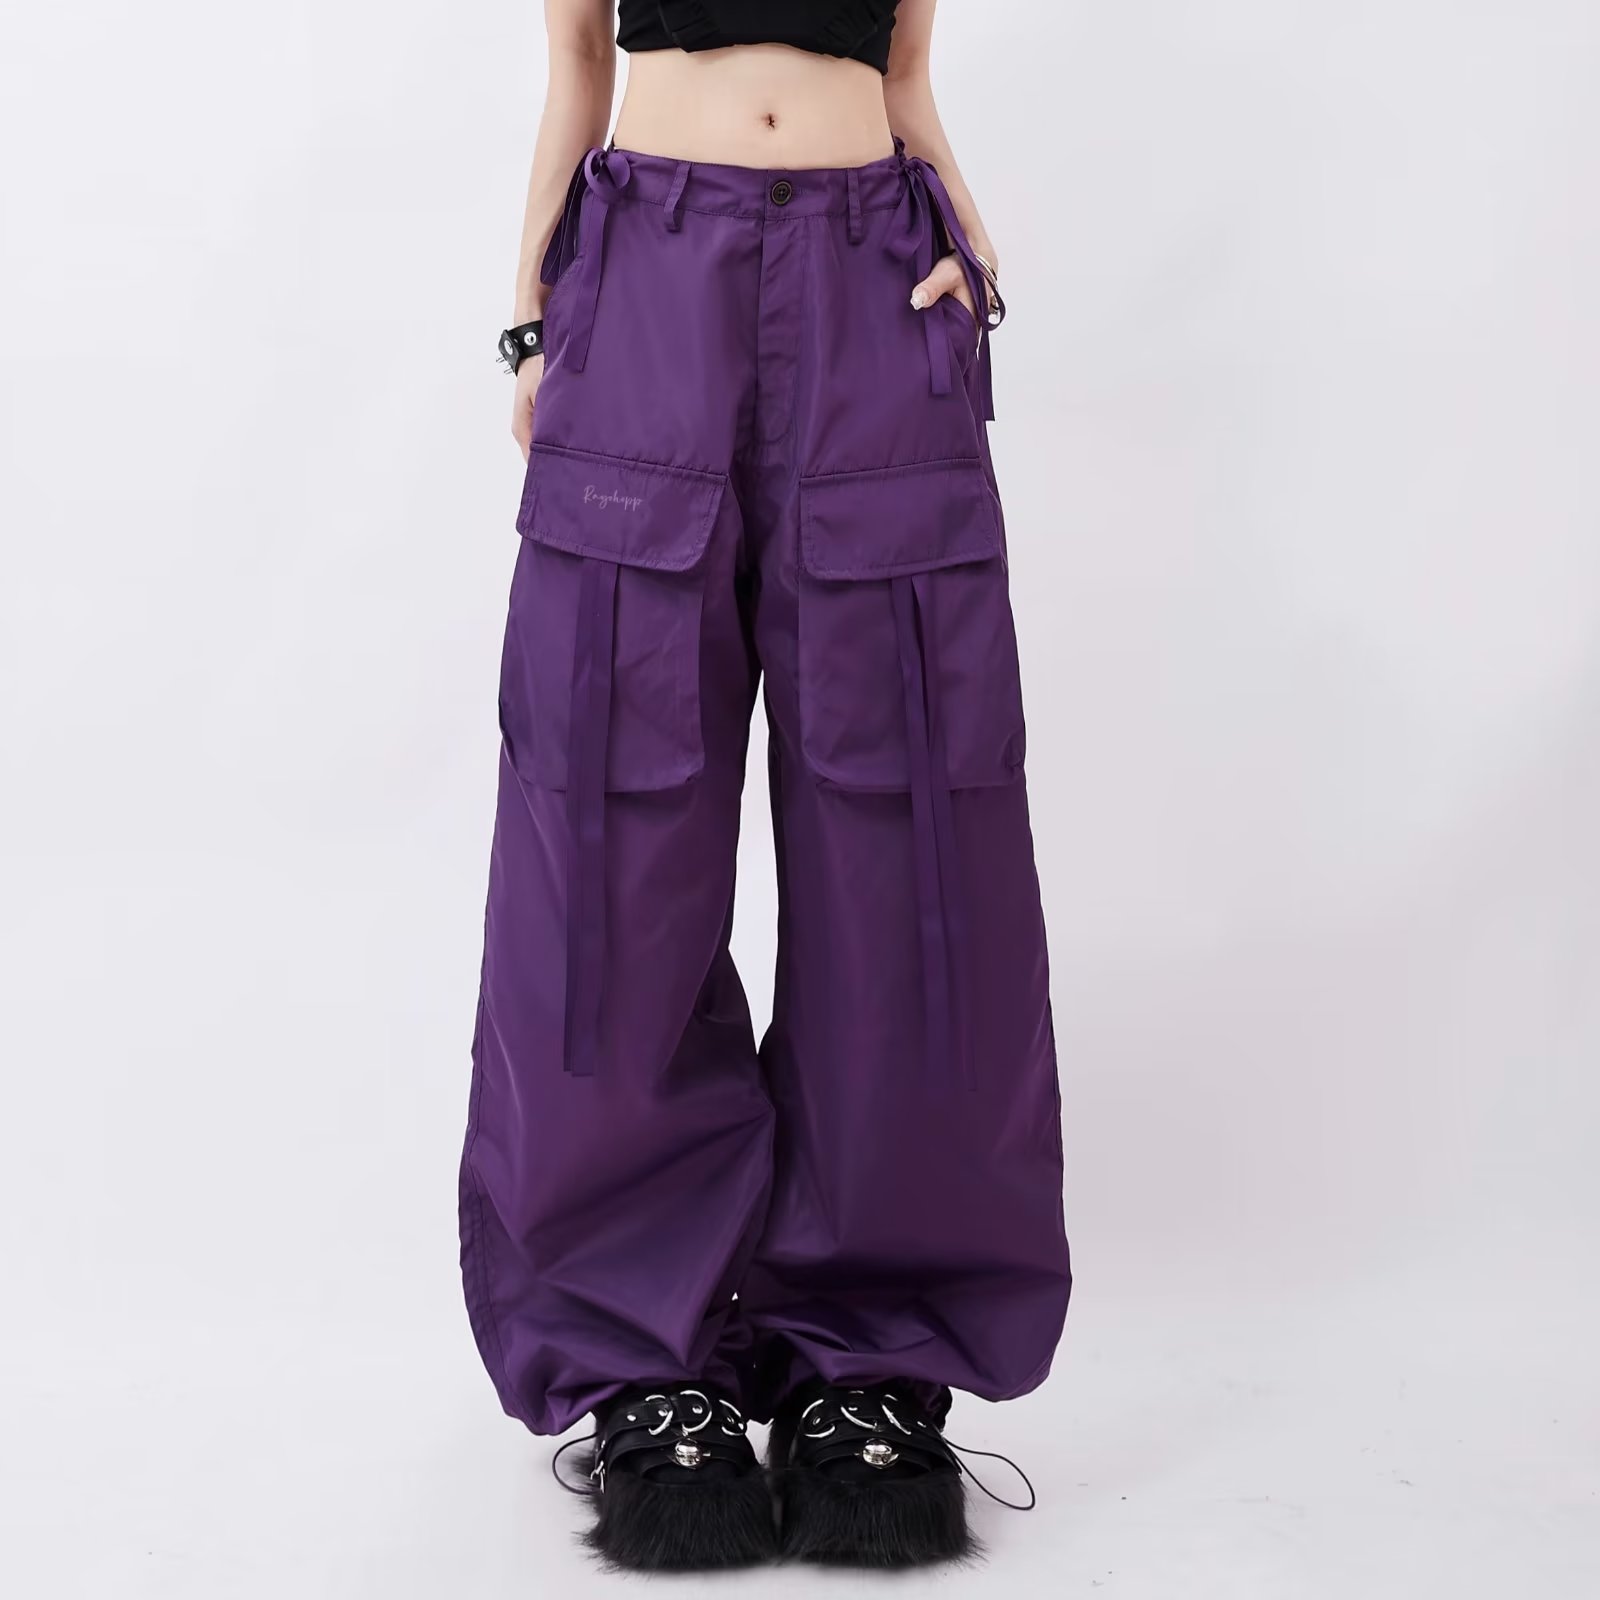 New American style retro purple overalls women's summer loose large size casual pants spring and autumn trendy brand wide leg pants